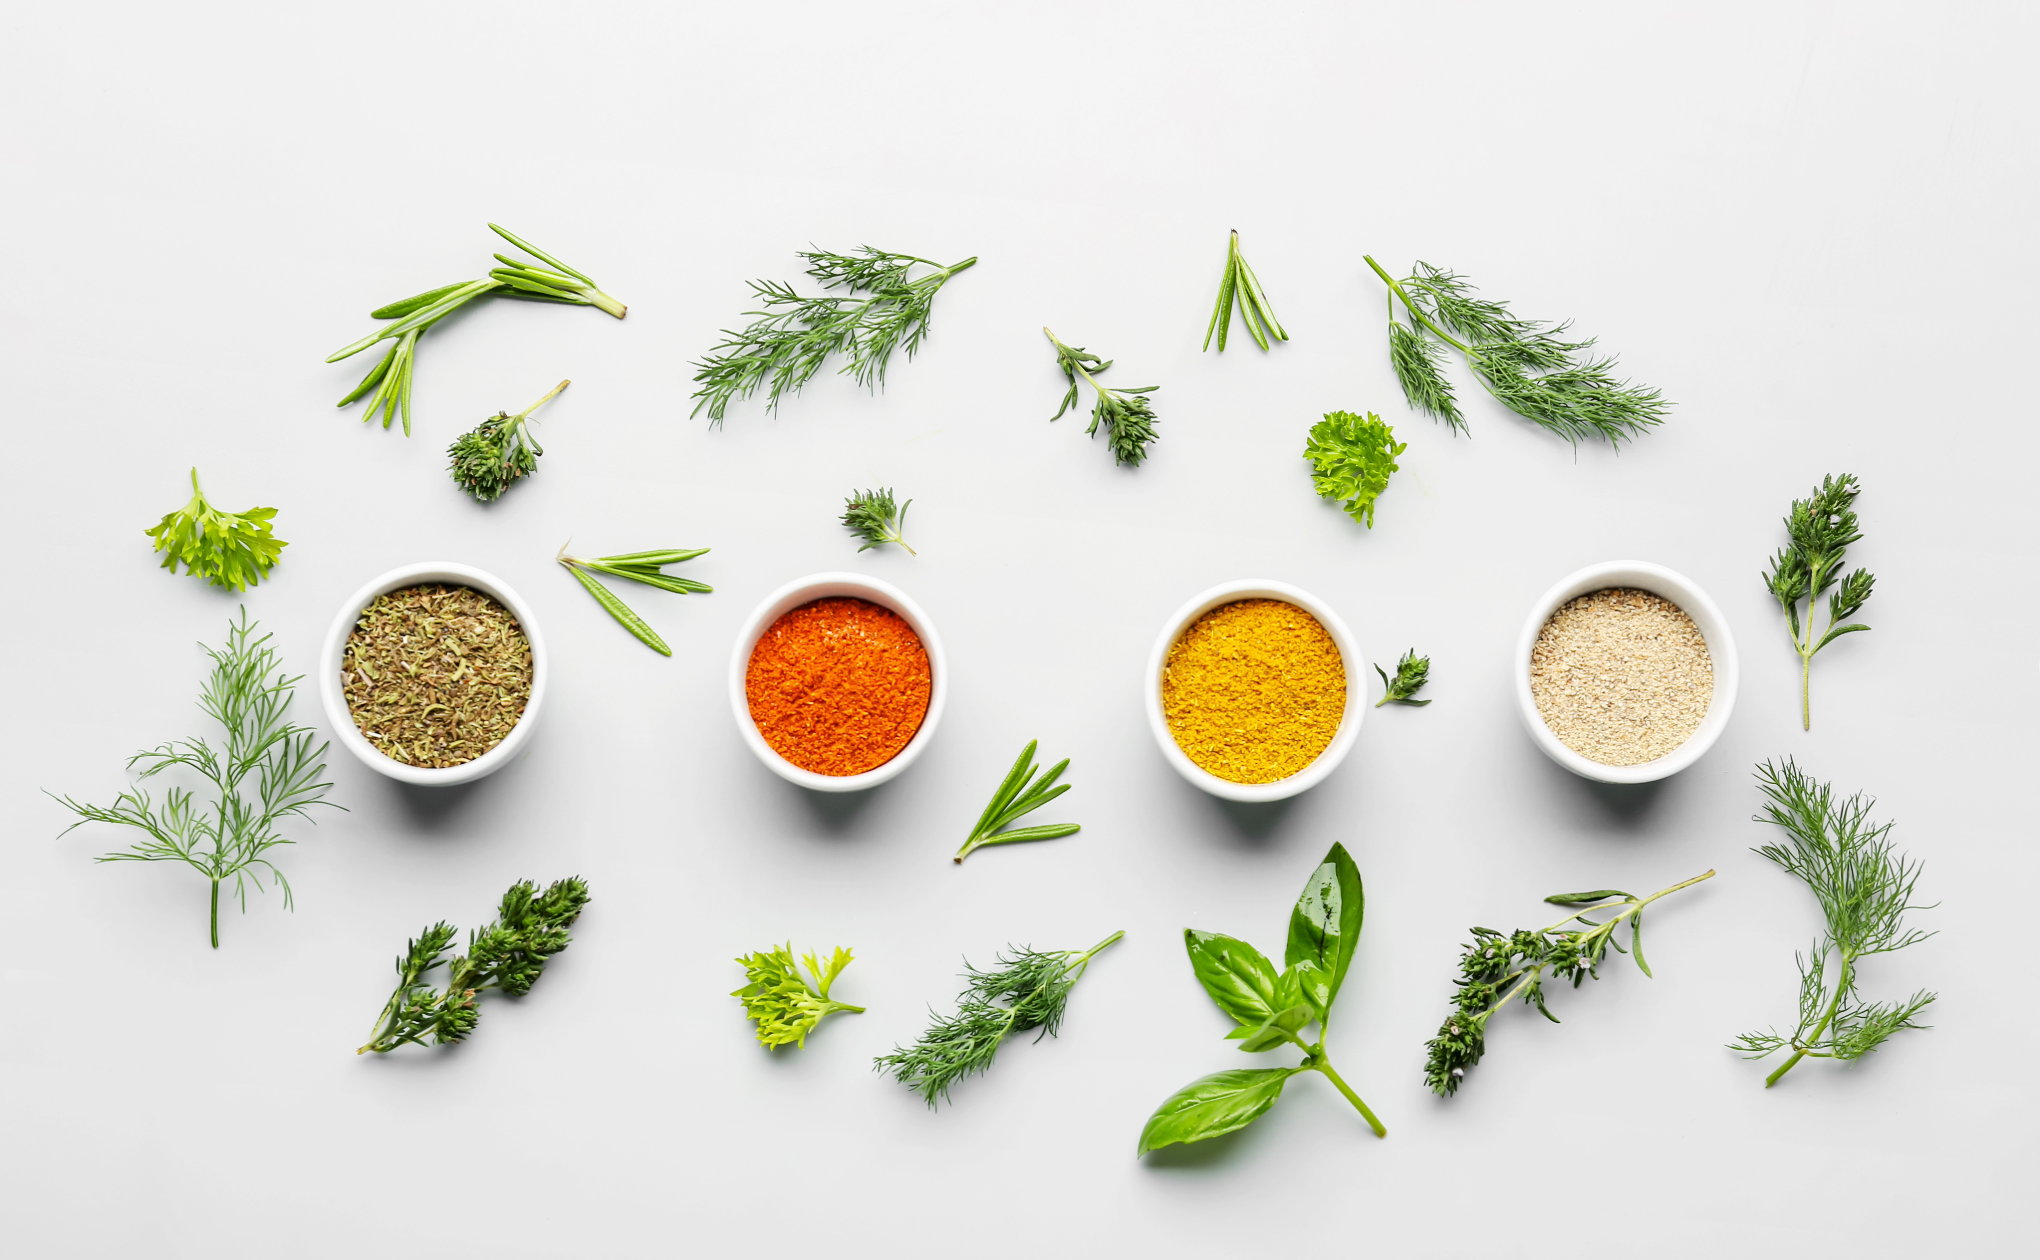 Display of herbs used for culinary delights - Image For Cooking With Herbs